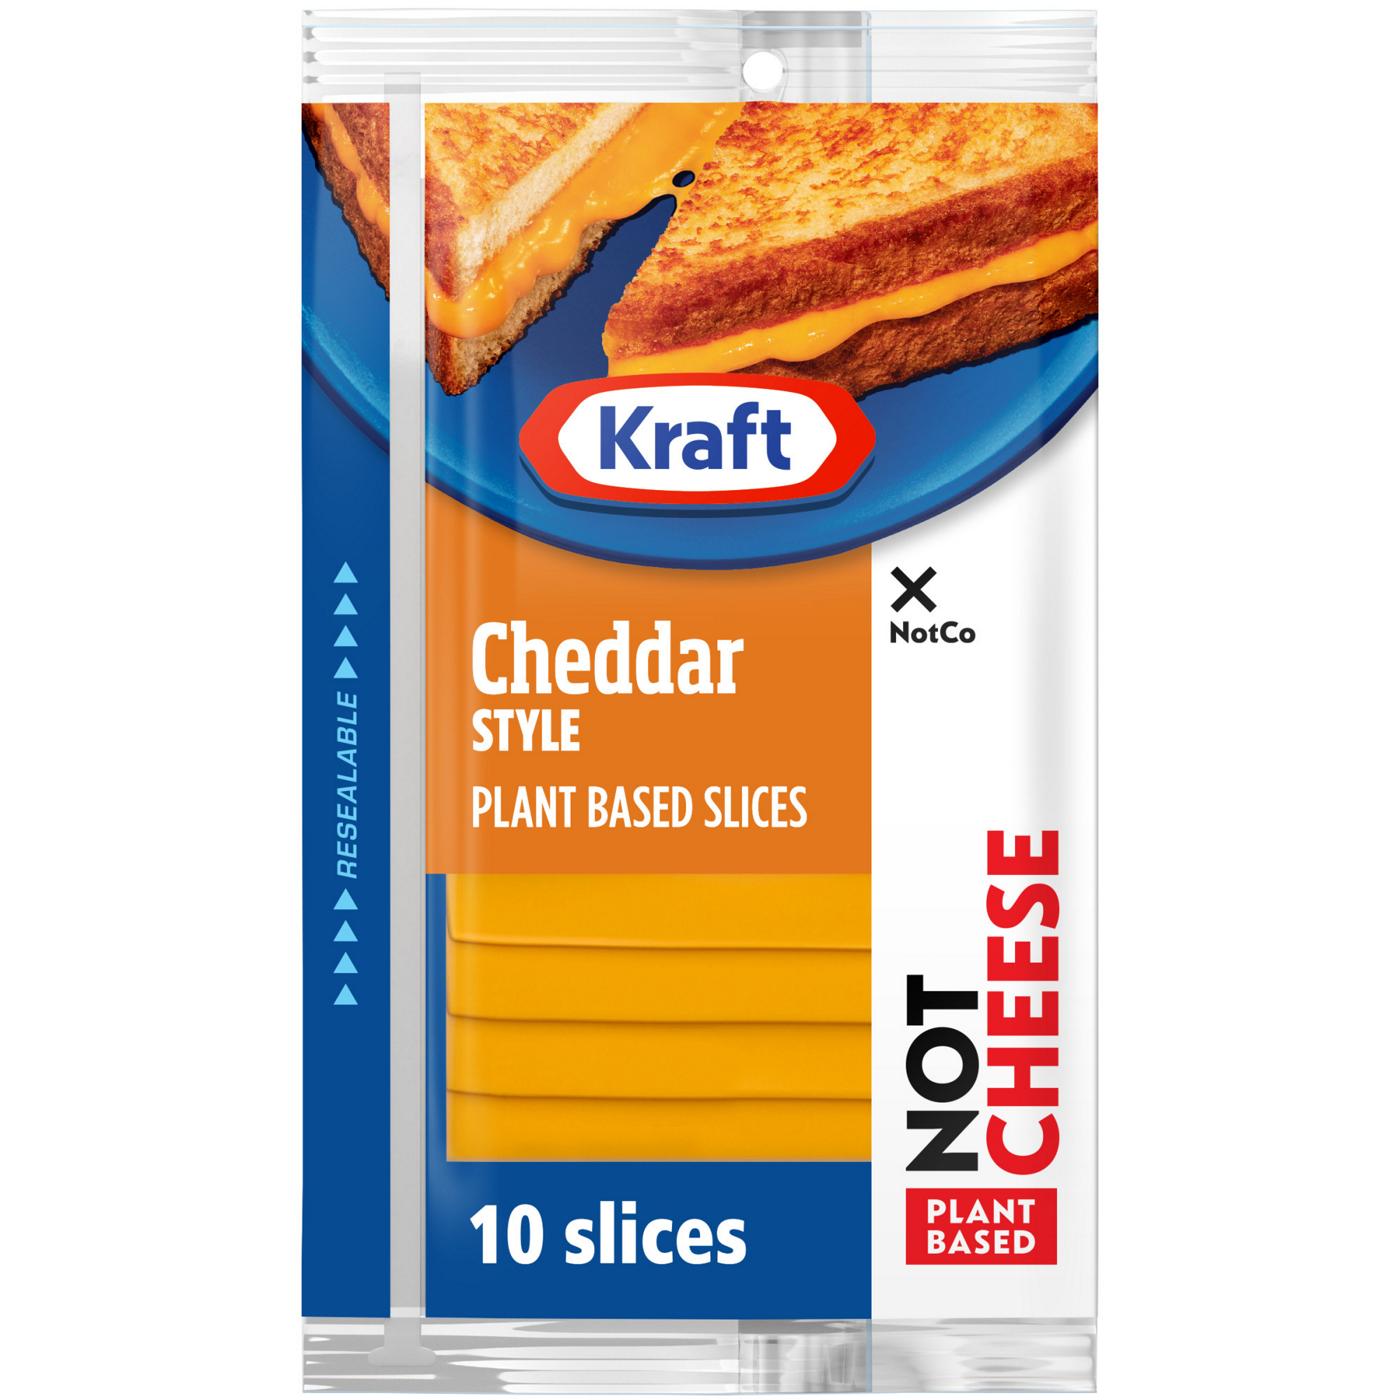 Kraft Not Cheese Plant Based Slices - Cheddar Style; image 1 of 8